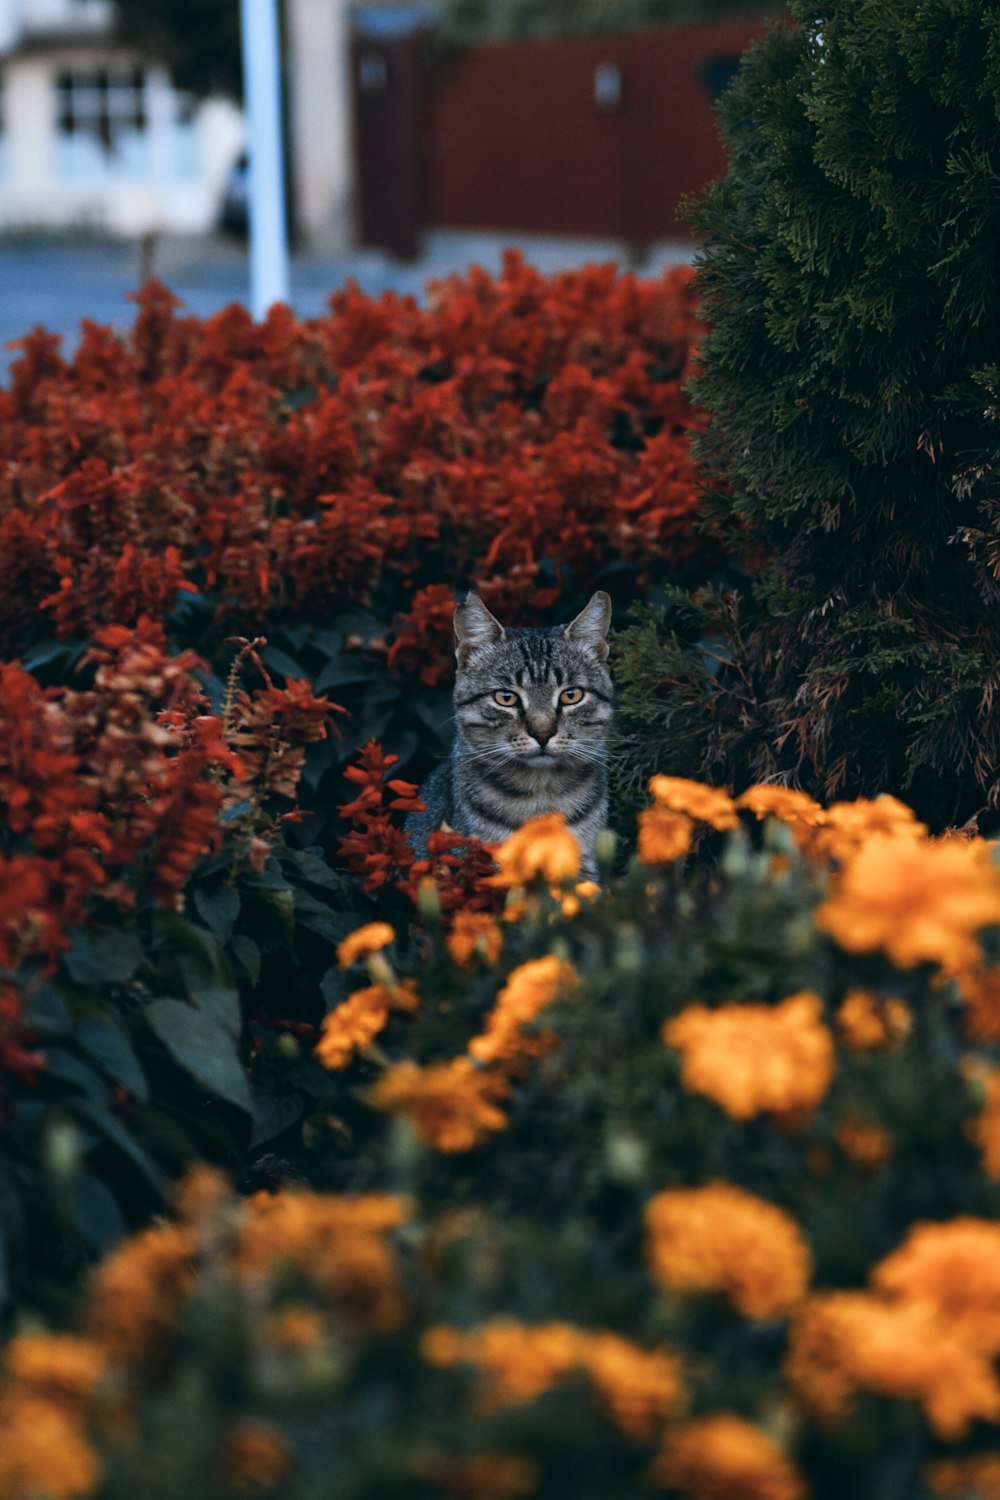 brown tabby cat on the ground surrounded by orange flowers